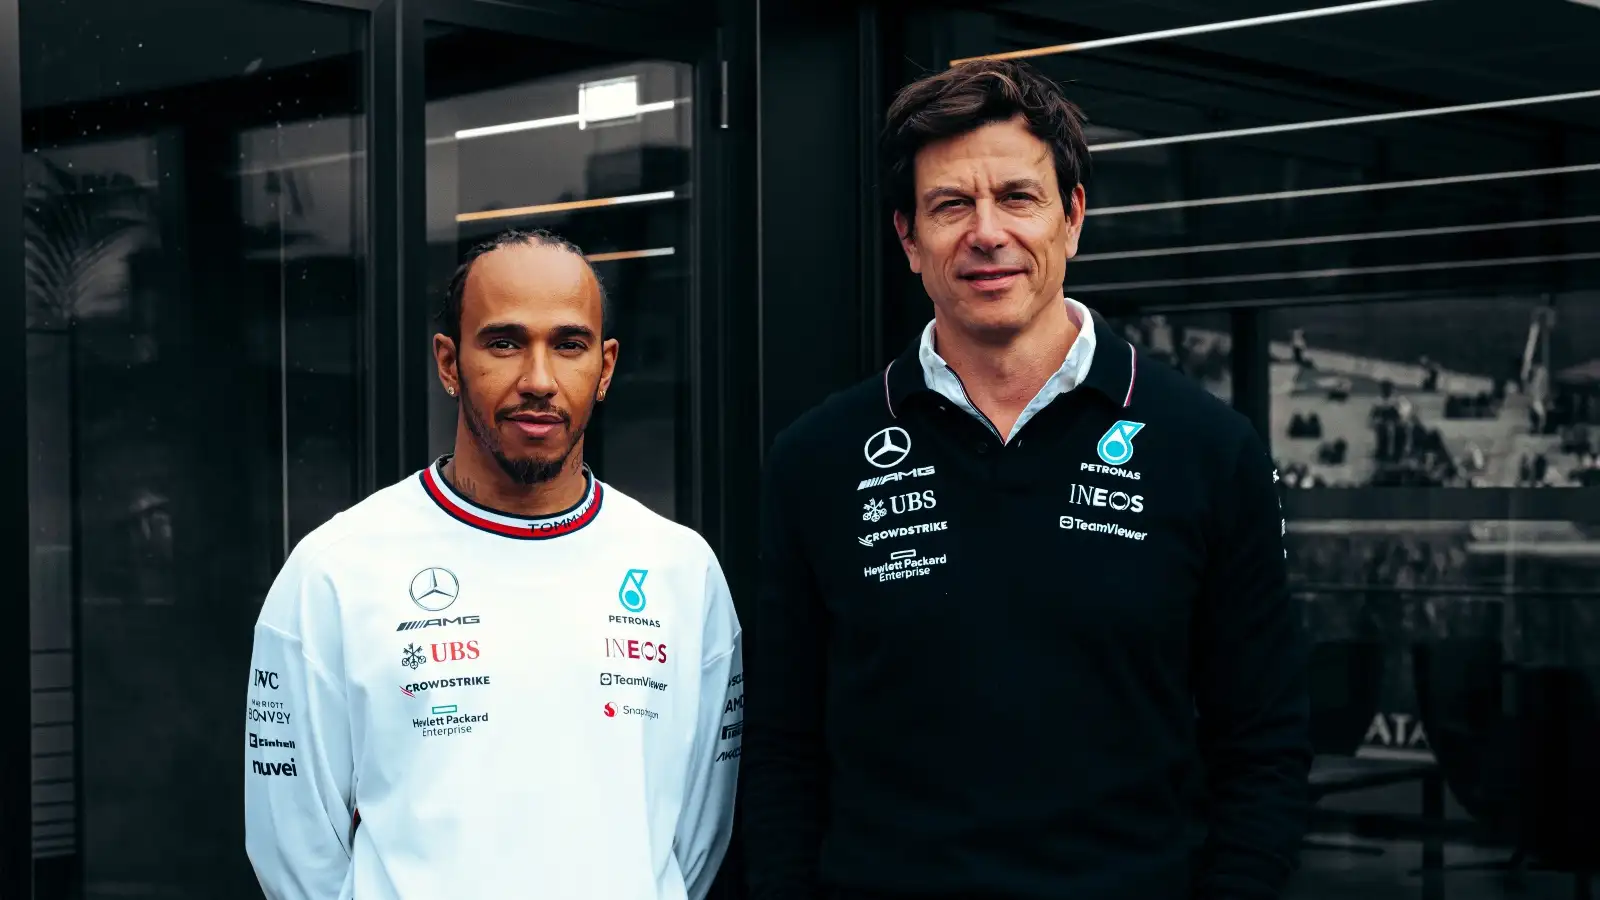 Lewis Hamilton and Toto Wolff pose for a photograph after new contract extension